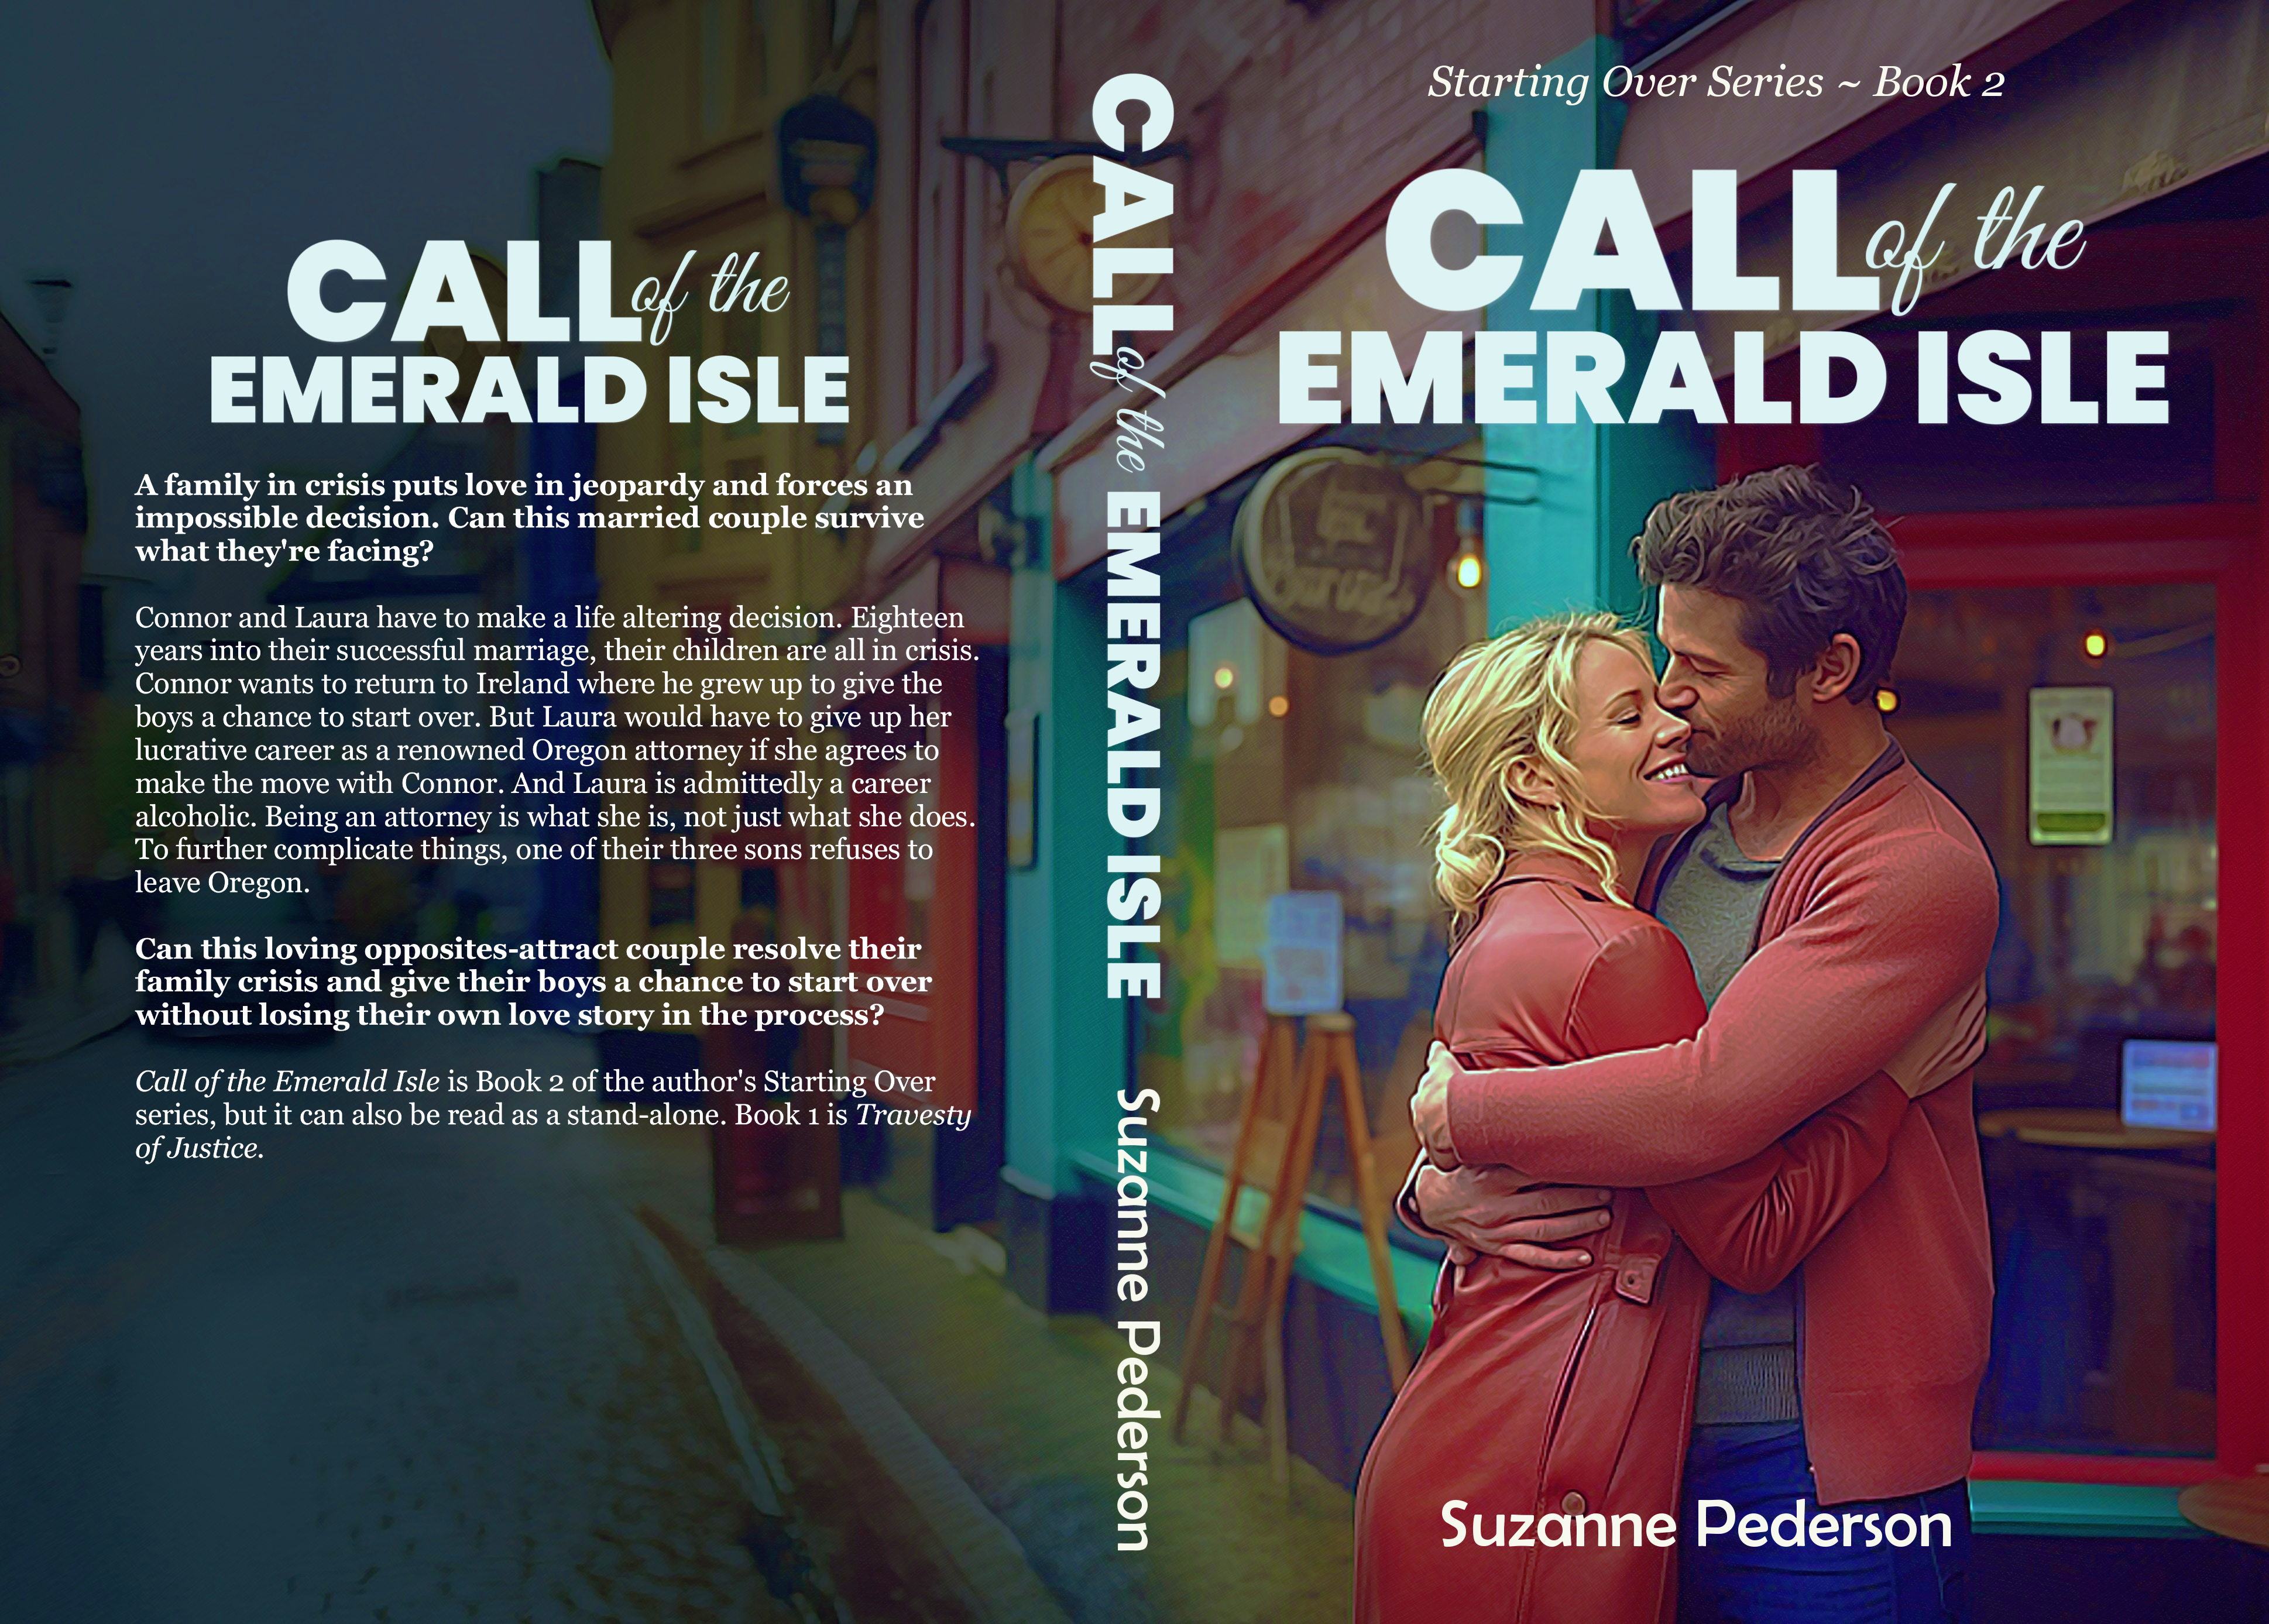 Call of the Emerald Isle  Book 2 in the Starting Over series.  Released April 2022